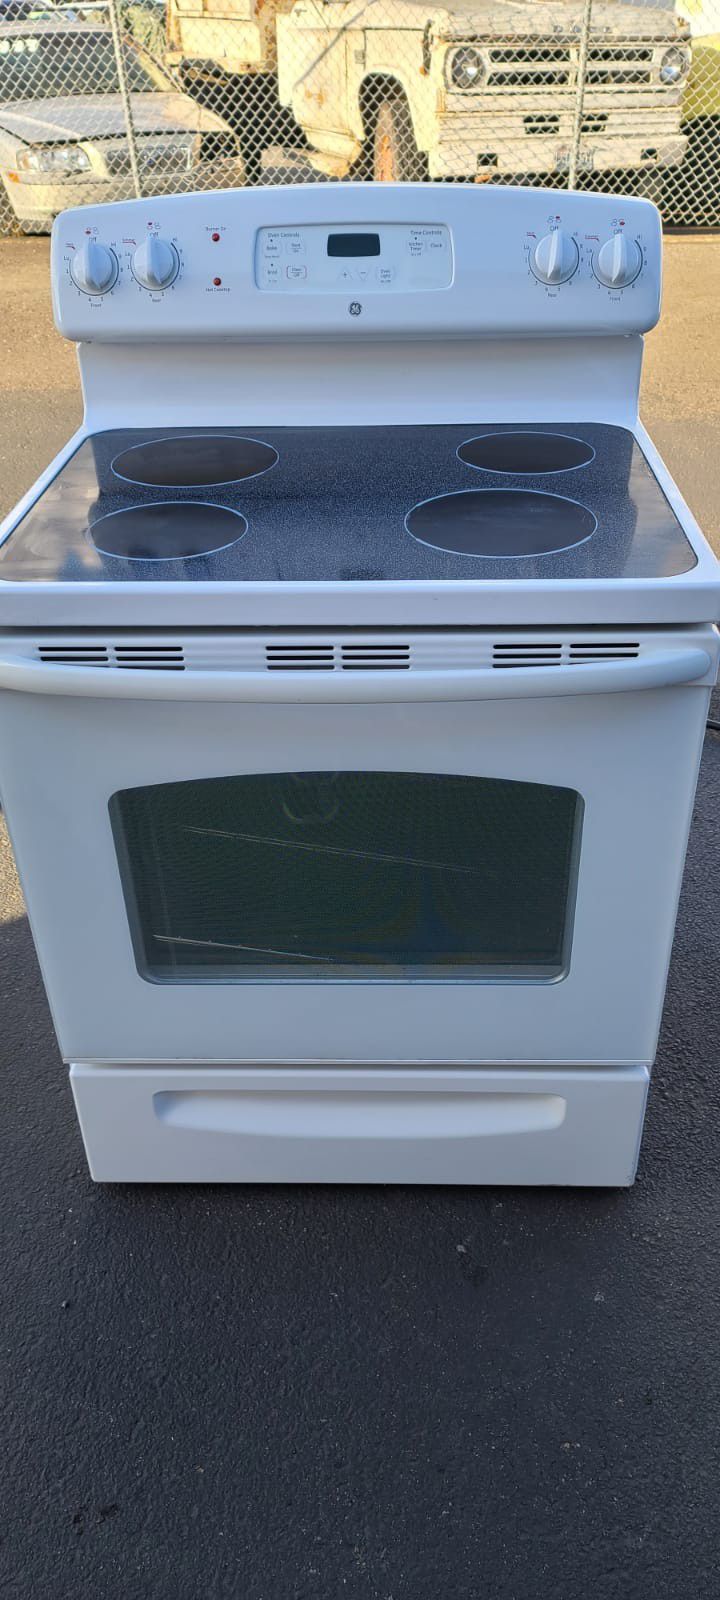 Ge Electric Stove good condition(can deliver for free up to 15 miles(small fee for gas if over 15 miles